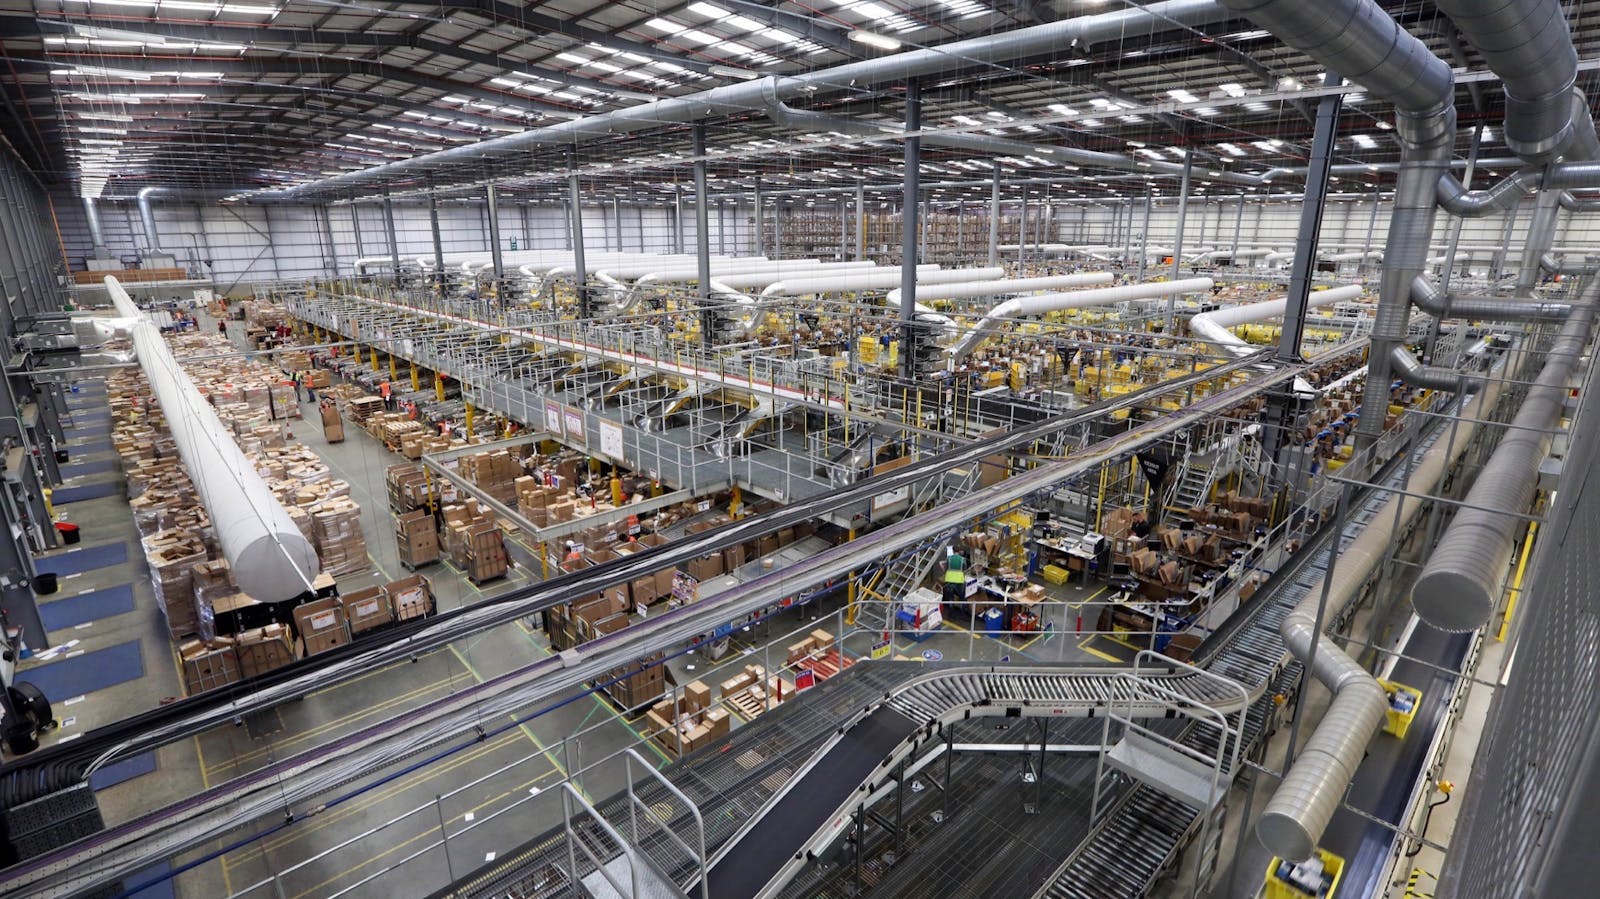 An Amazon warehouse. Photo by Bloomberg